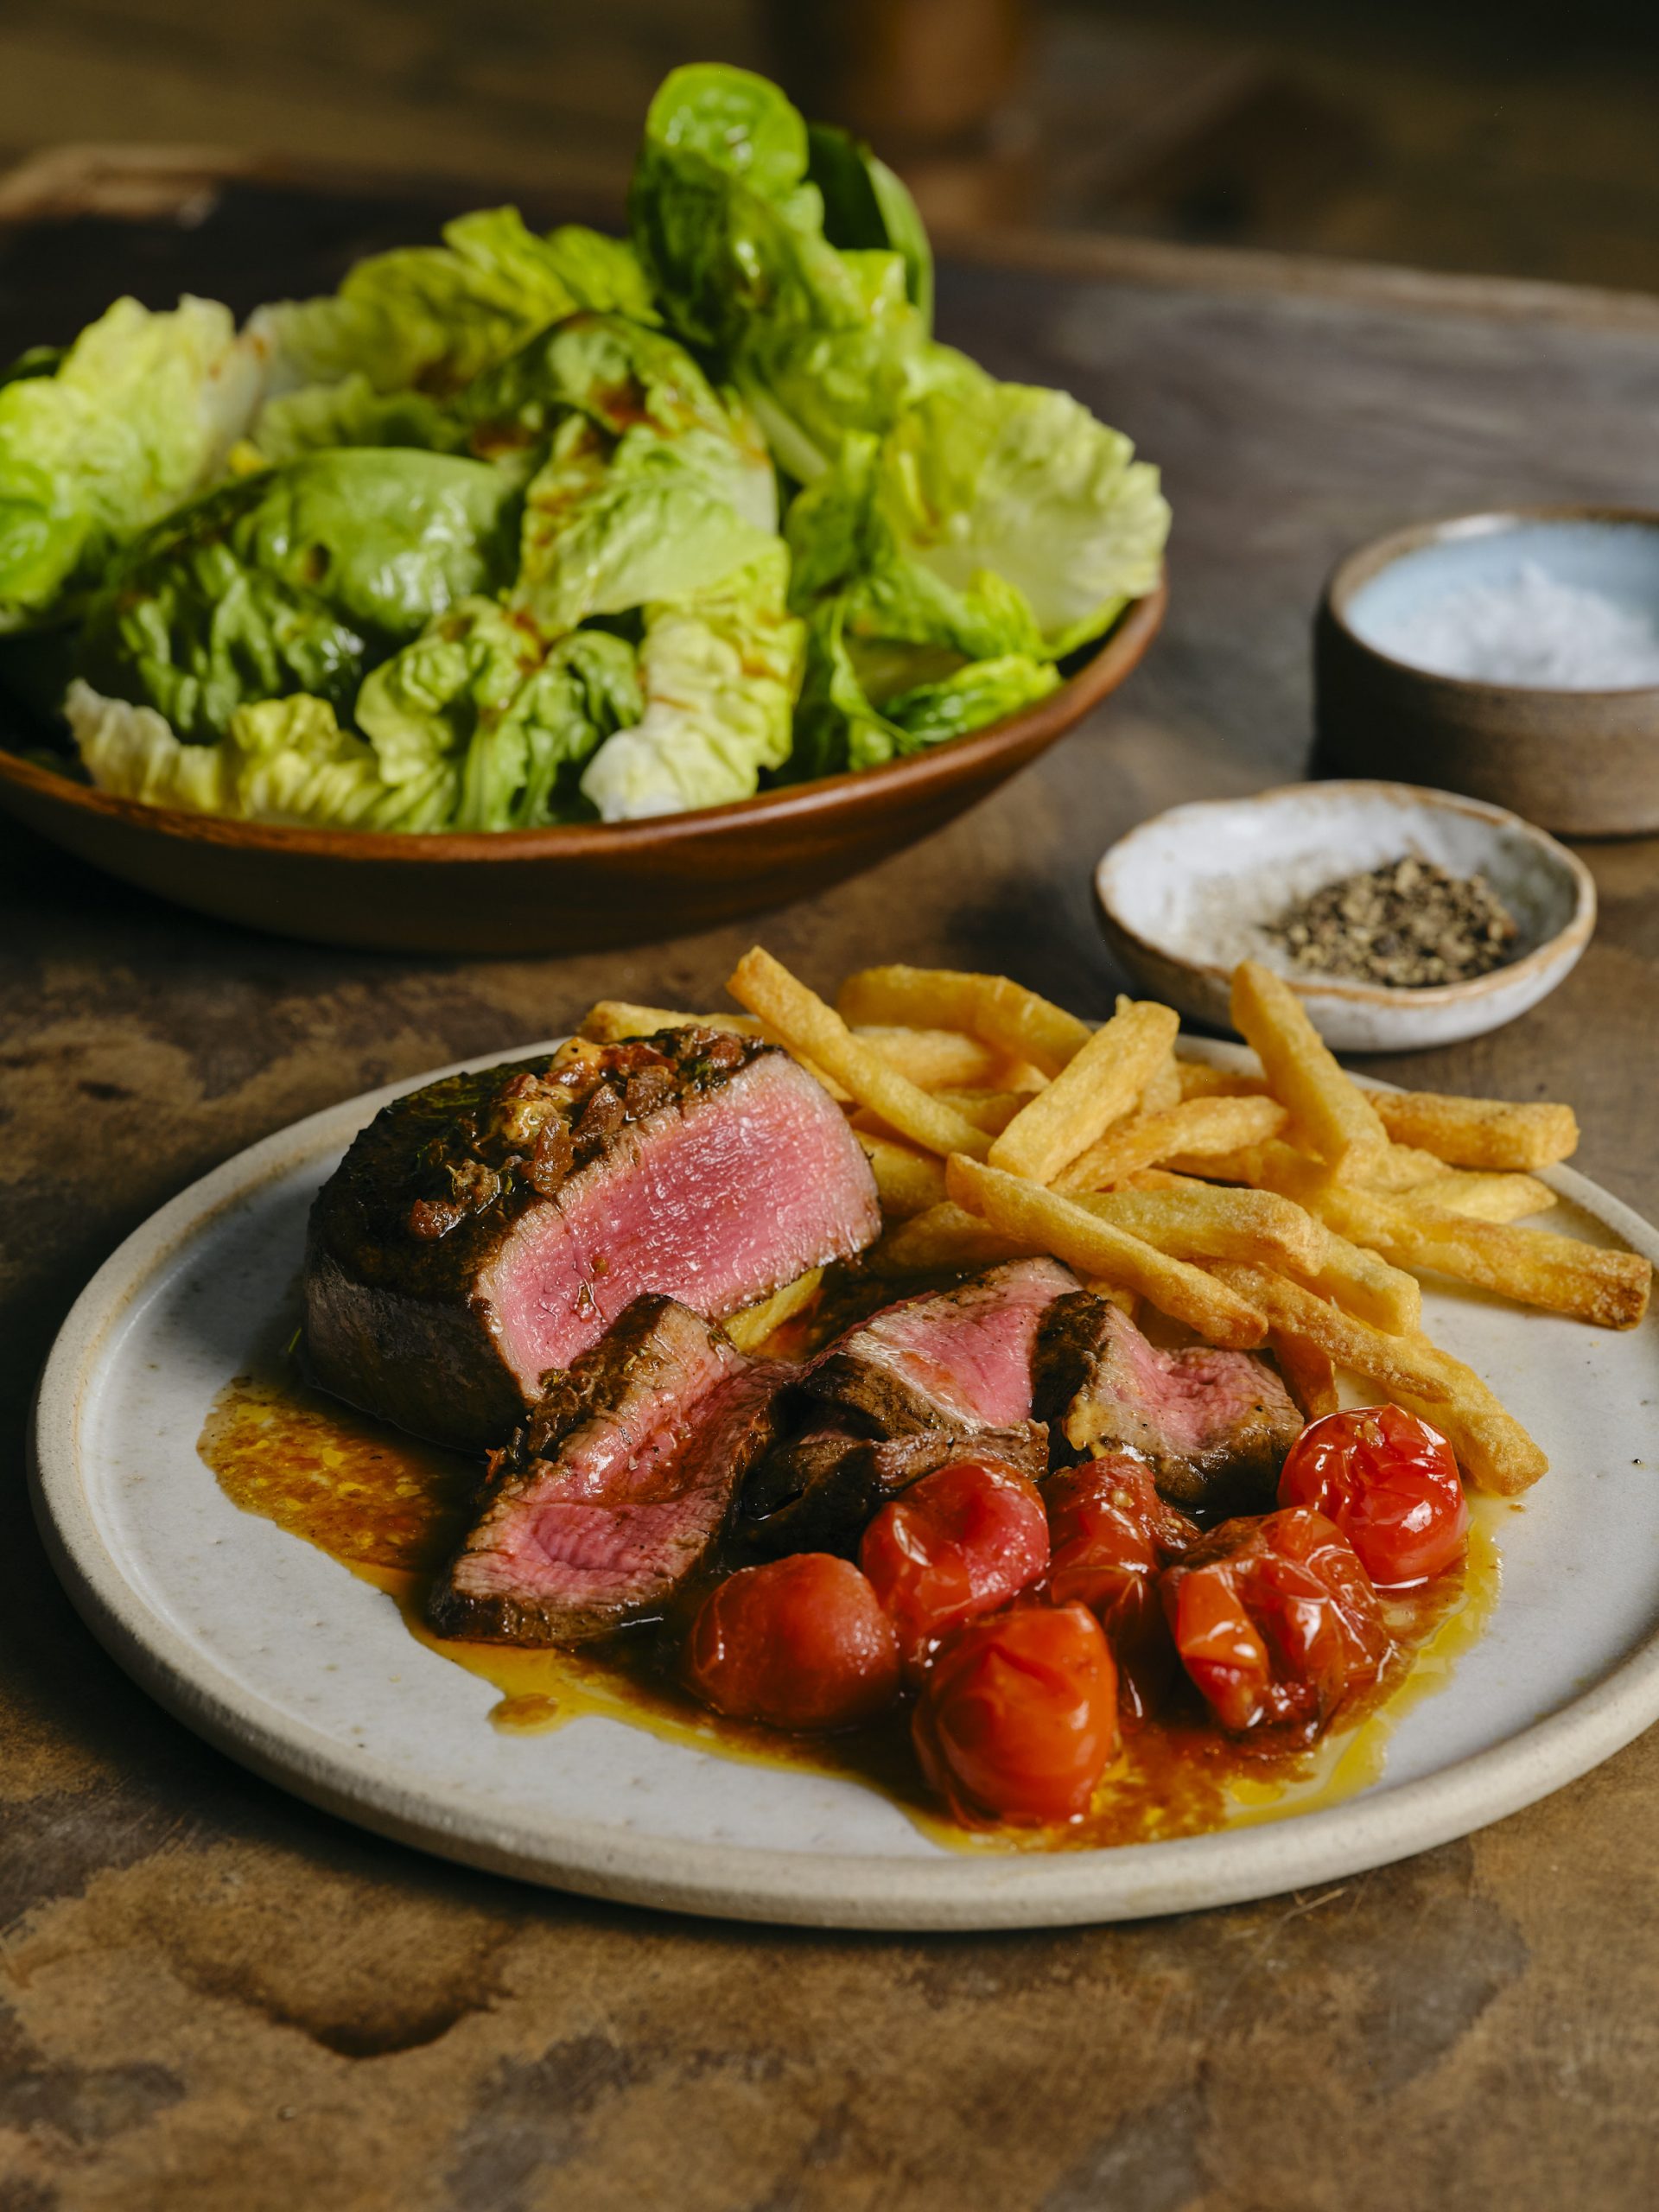 Tomatoes, rare steak and chips